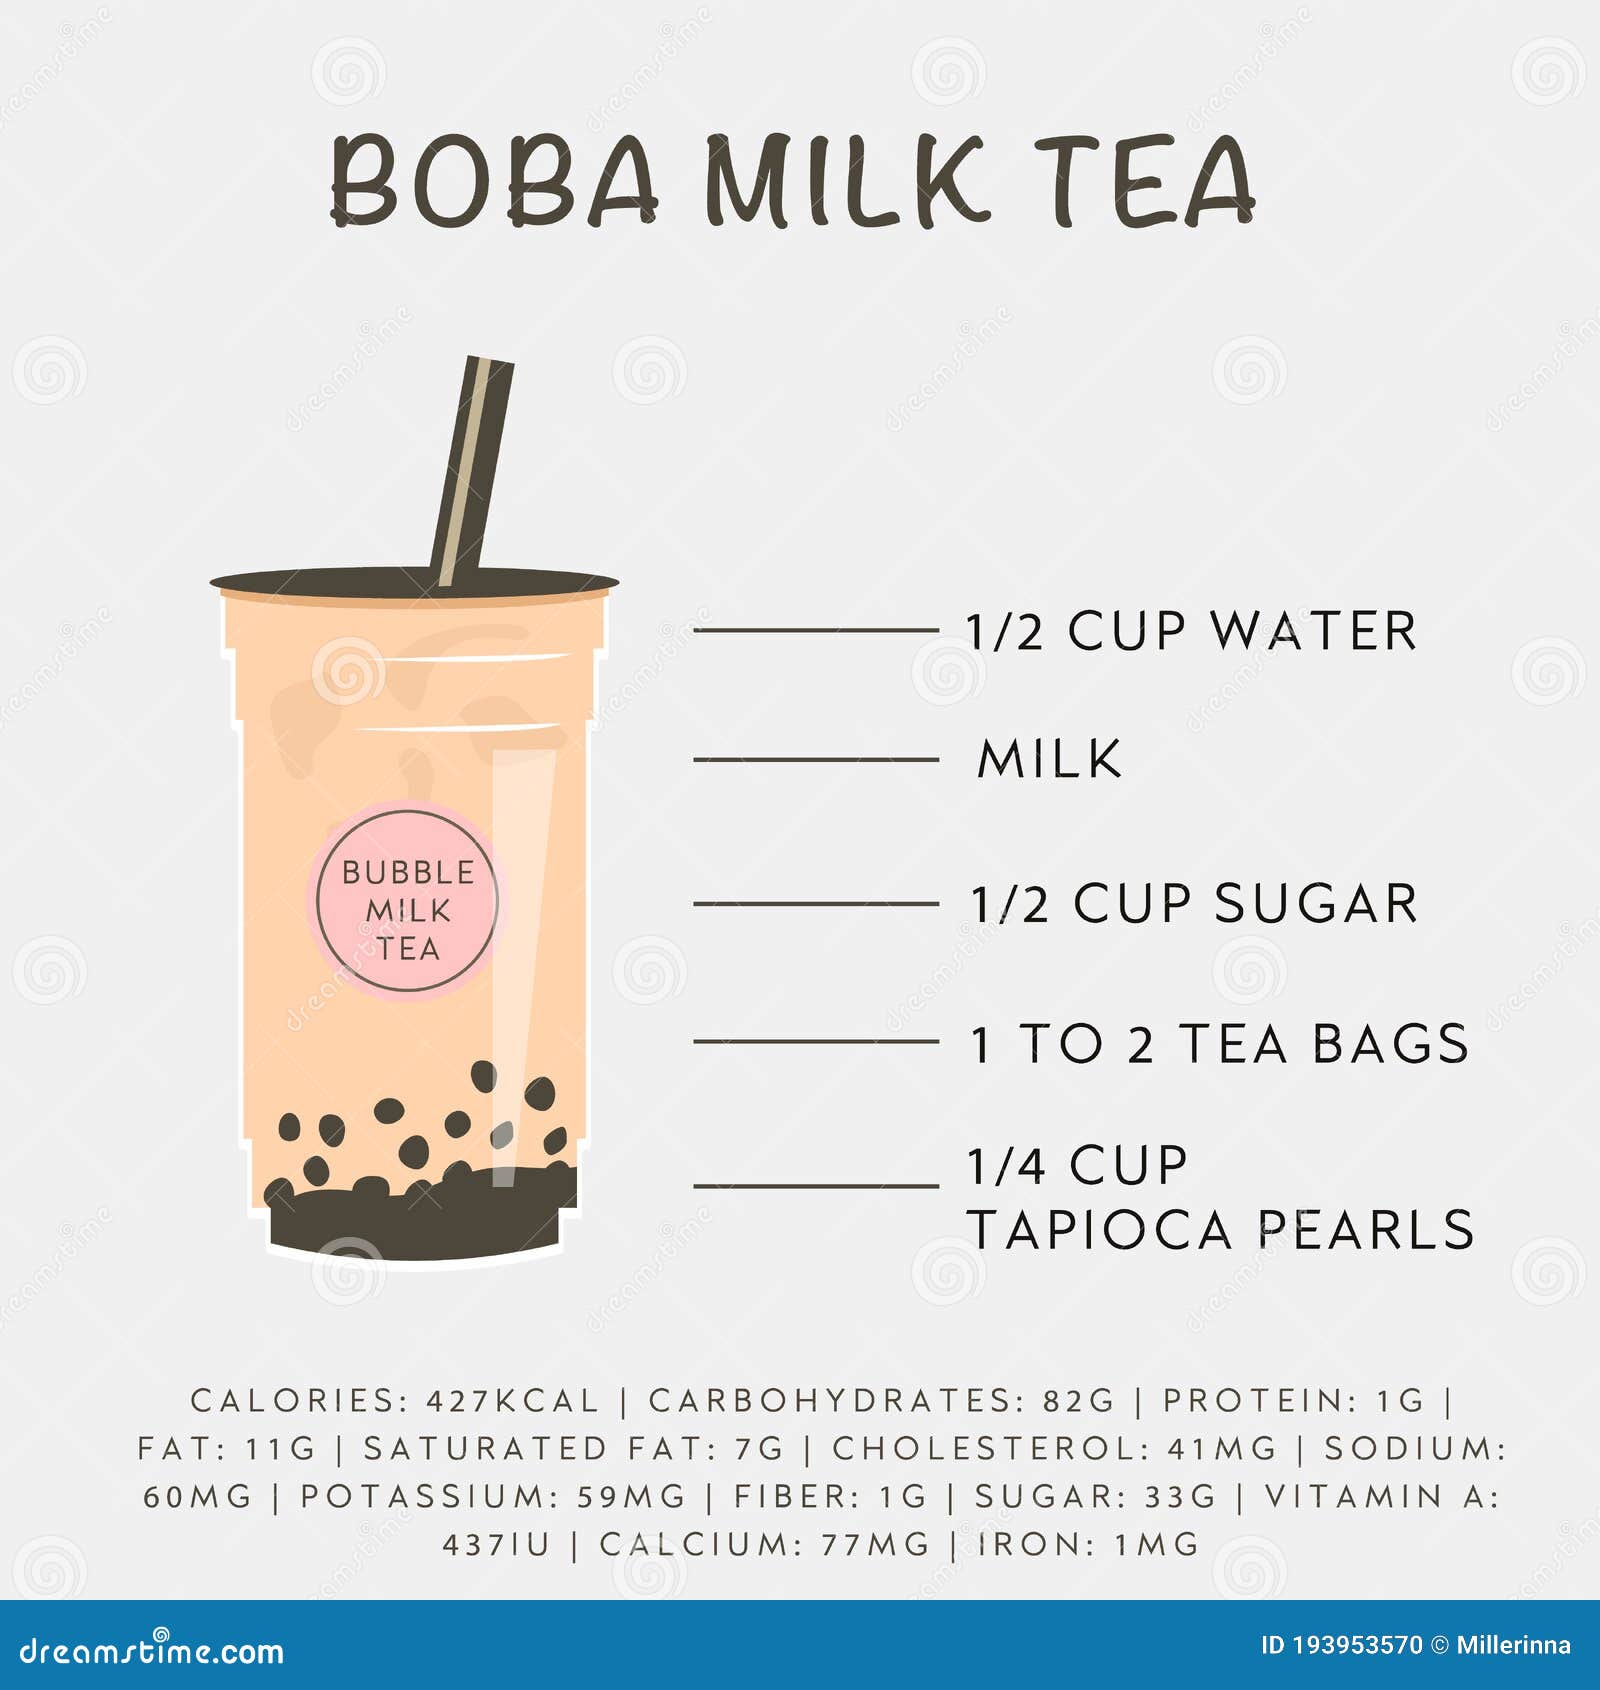 Bubble Milk Tea Recipe And Nutrition Facts Banner For Taiwanese Drink Boba With Black Tapioca Pearls Menu For Asian Stock Vector Illustration Of Straw Recipe